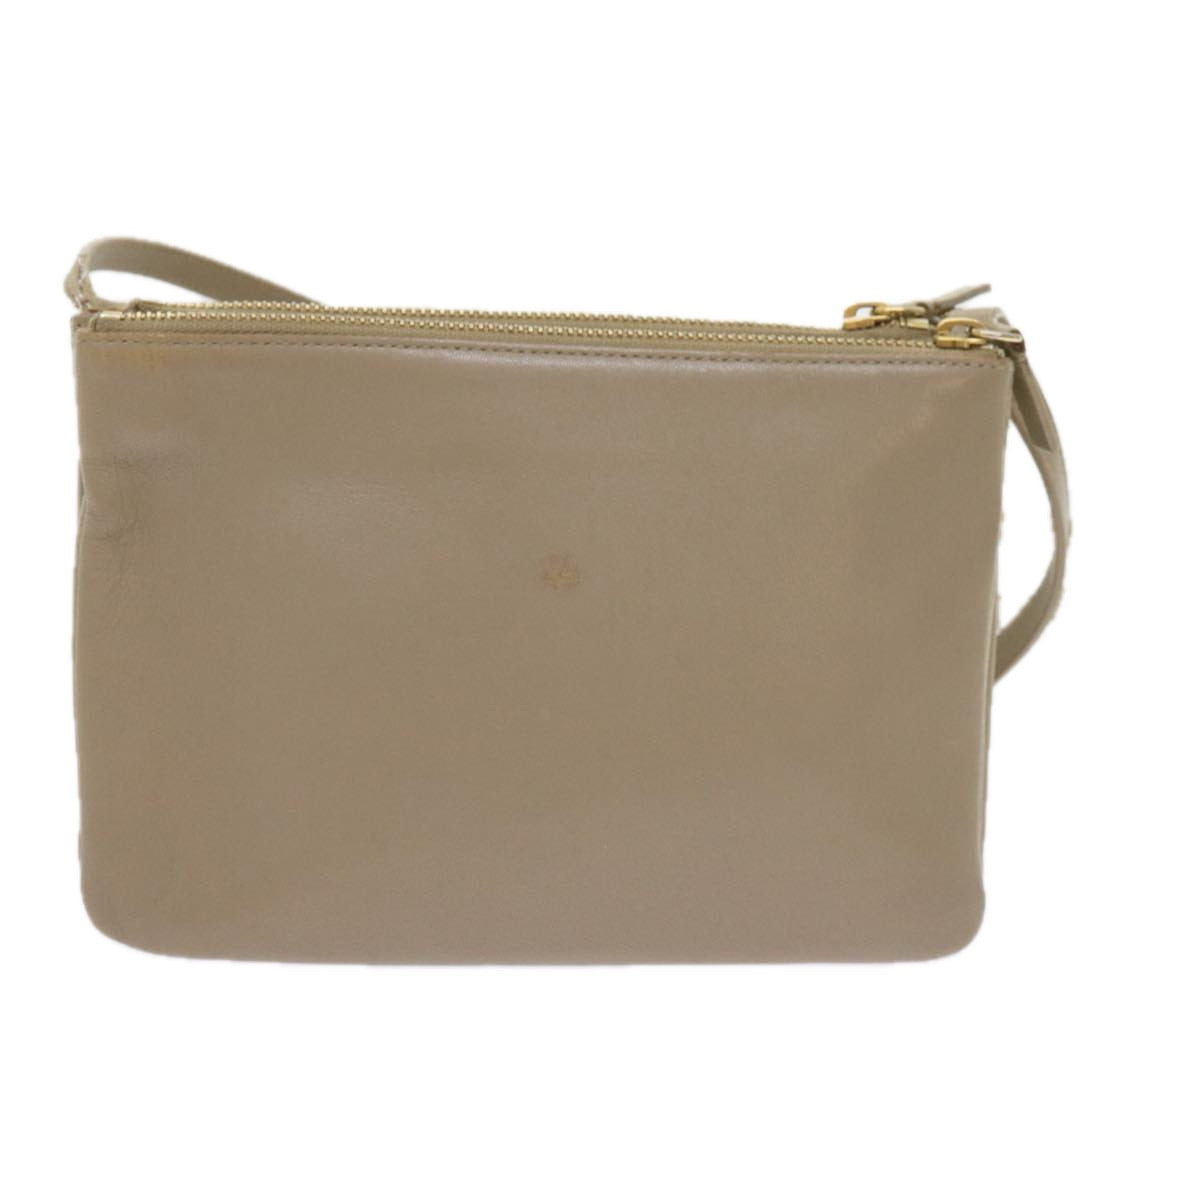 CELINE TRIO SMALL Shoulder Bag Leather Beige Auth bs8890